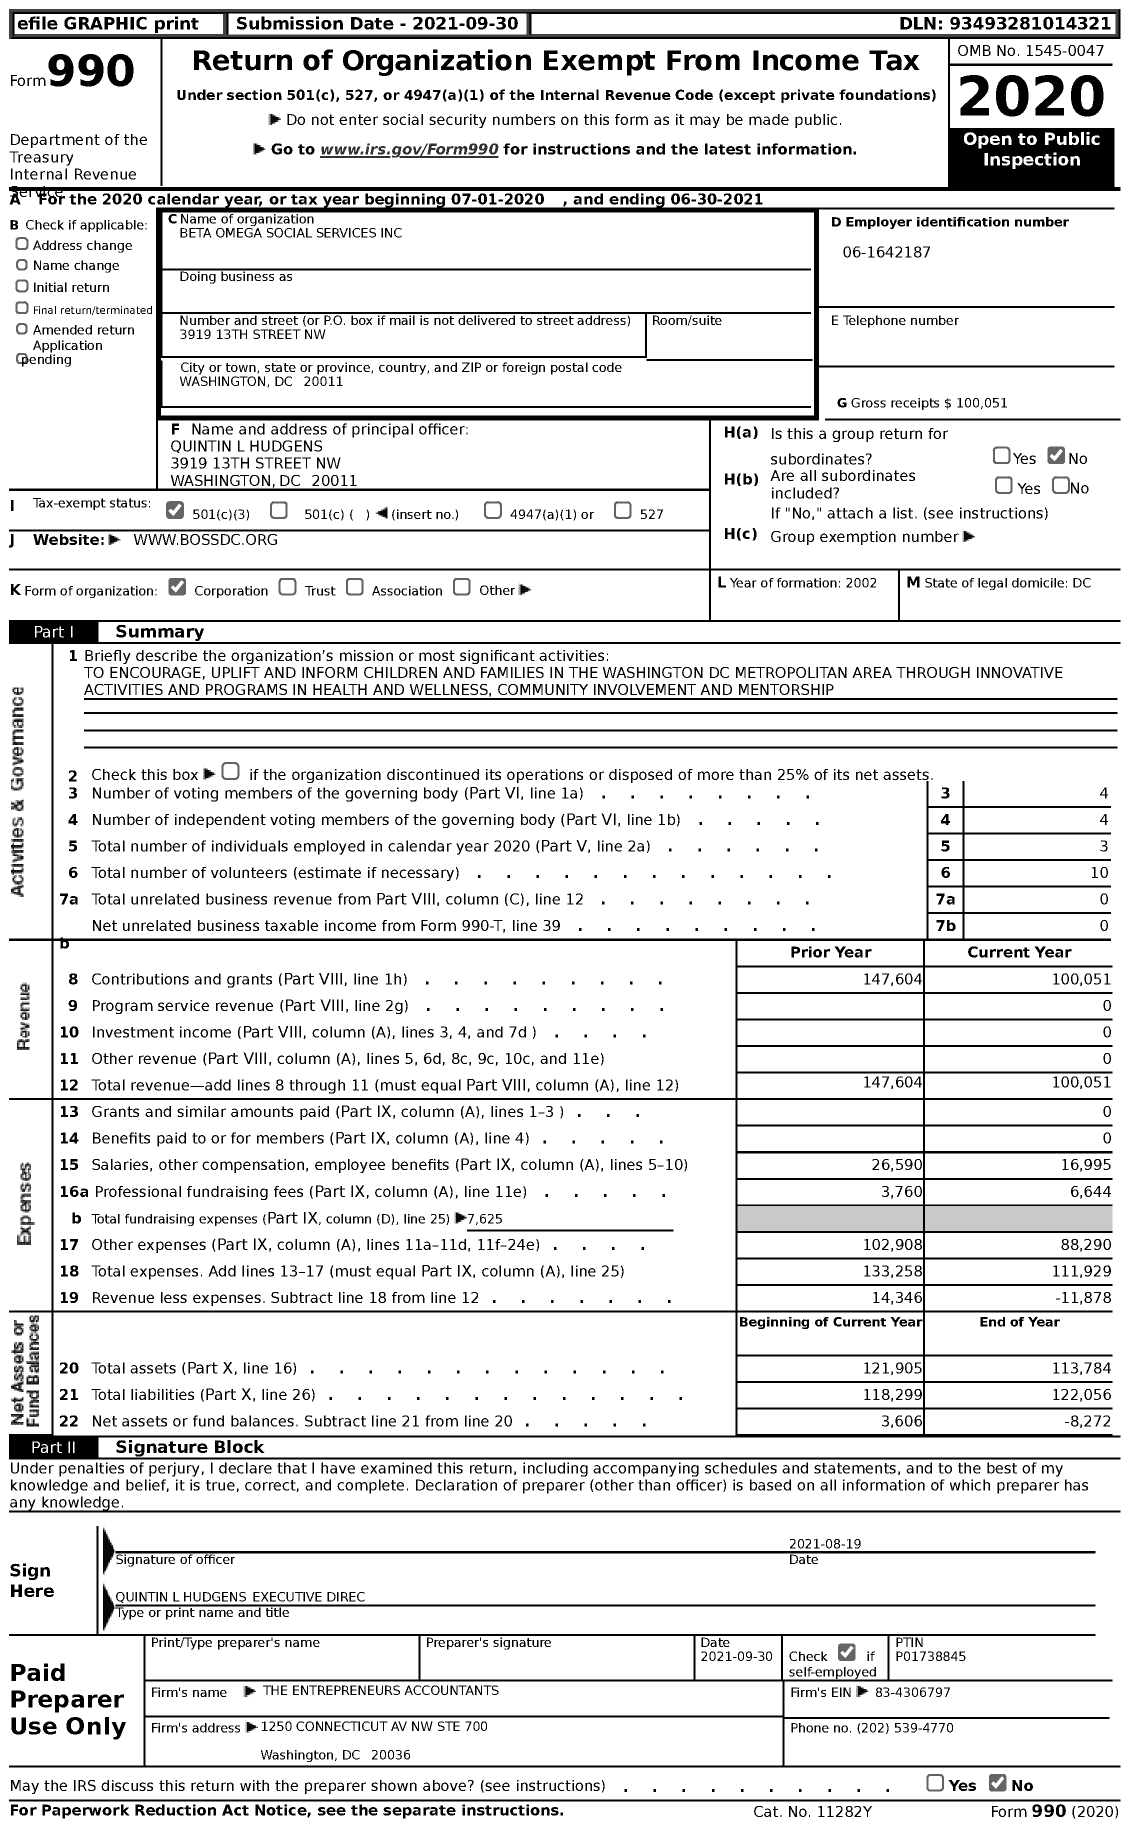 Image of first page of 2020 Form 990 for Beta Omega Social Services